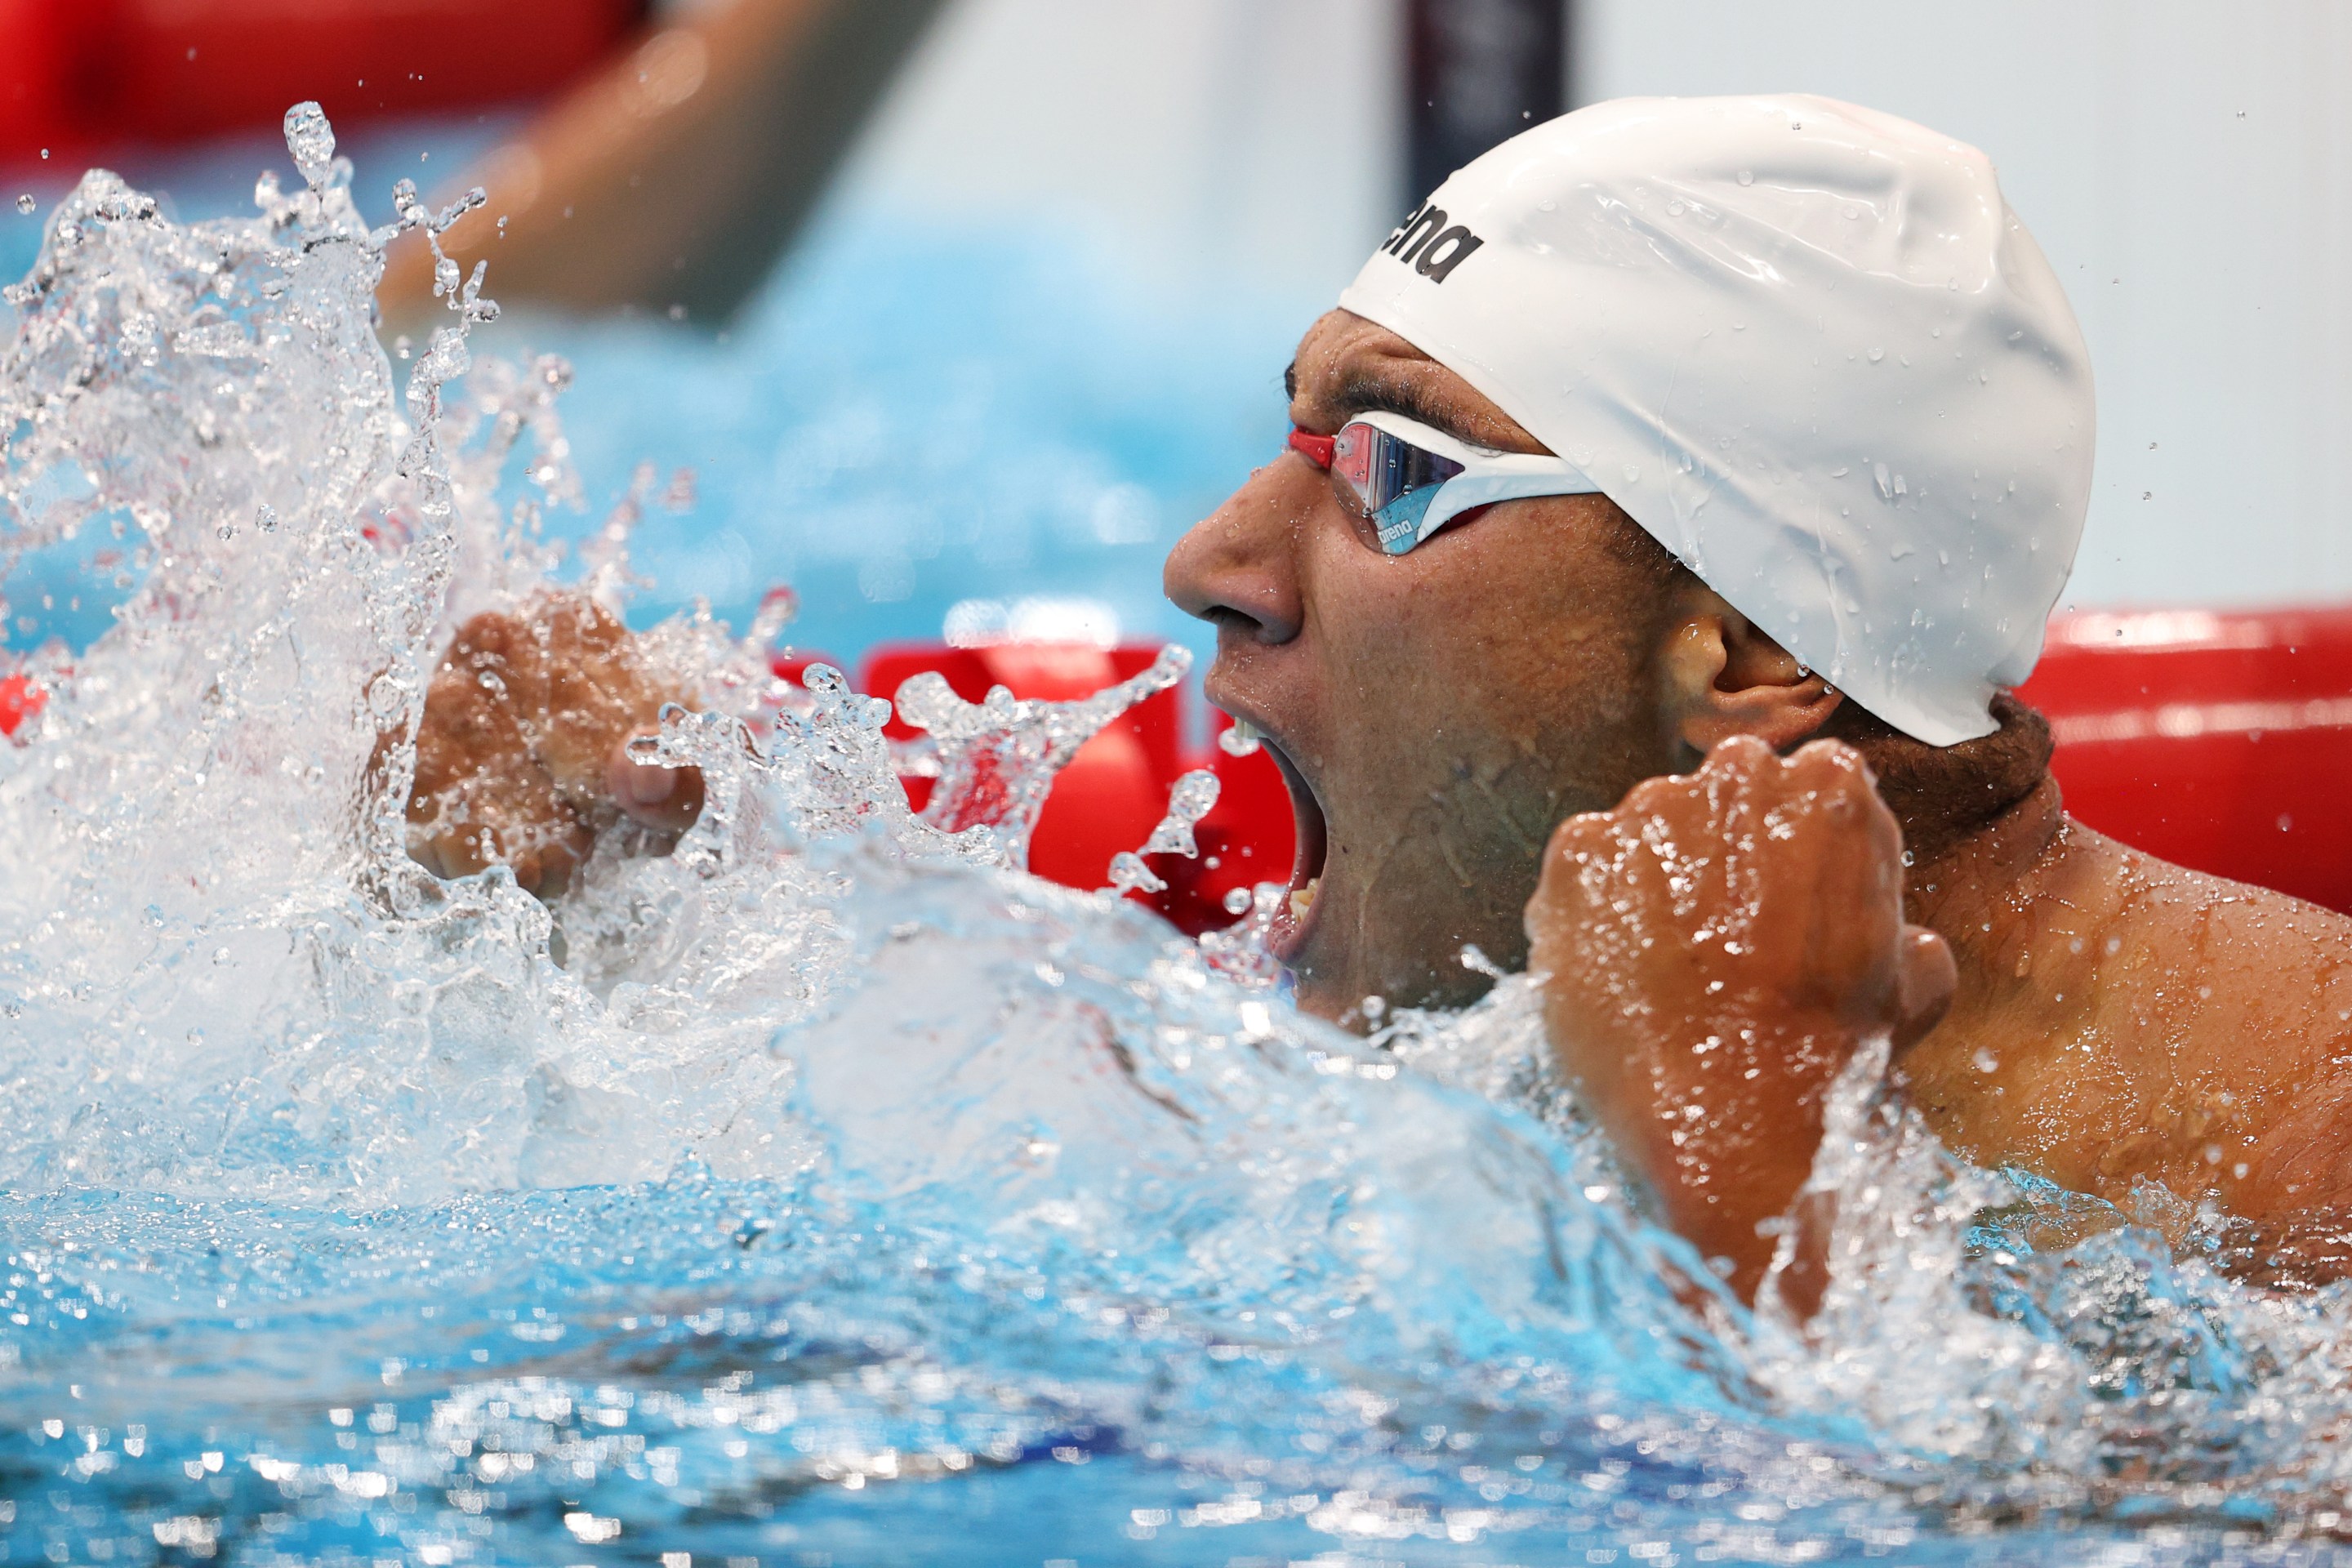 Ahmed Hafnaoui of Team Tunisia celebrates after winning the gold medal in the Men's 400m Freestyle Final on day two of the Tokyo 2020 Olympic Games at Tokyo Aquatics Centre on July 25, 2021 in Tokyo, Japan.